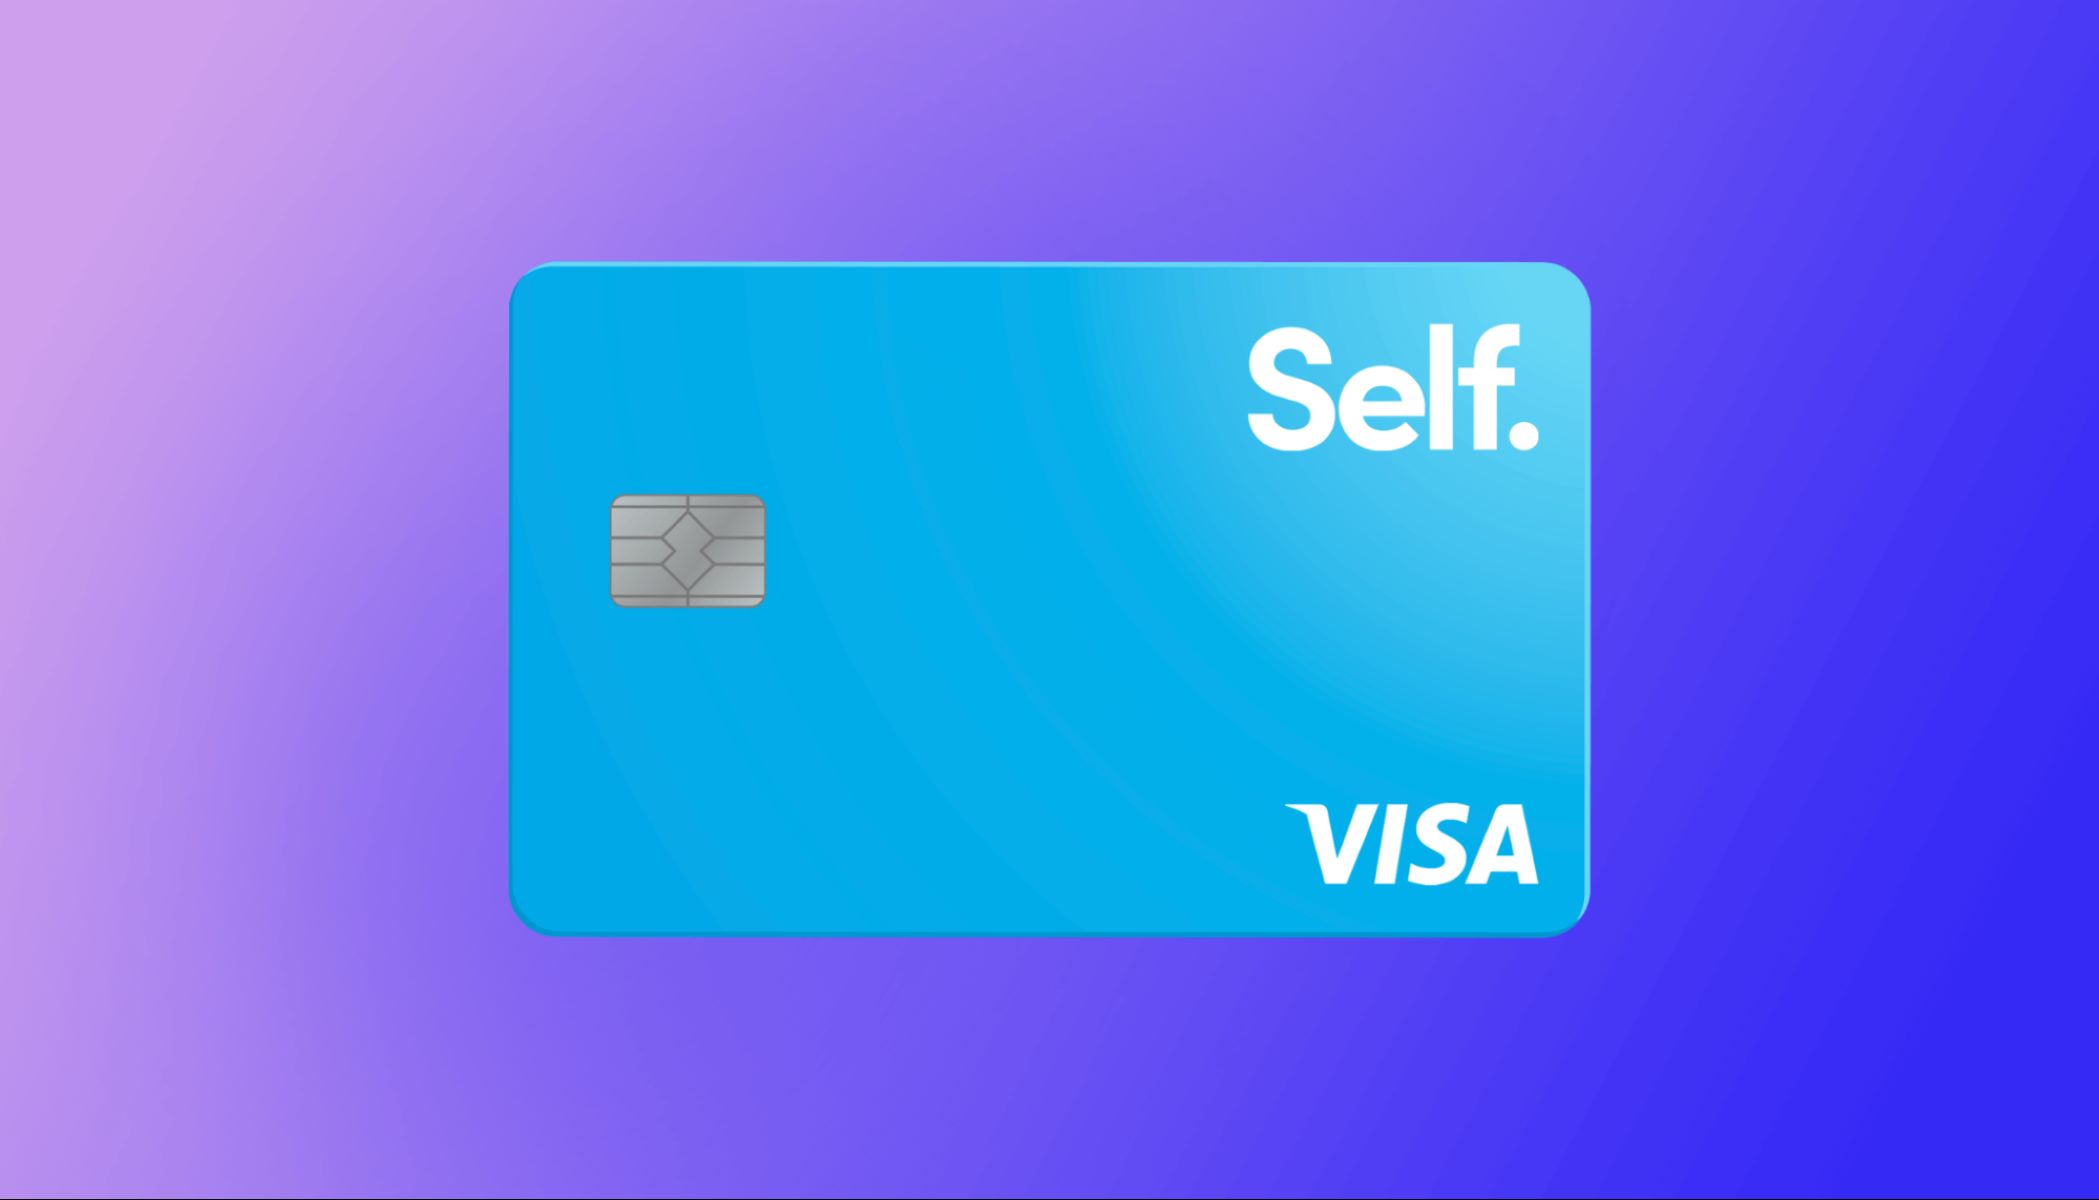 How Does Self Credit Card Work